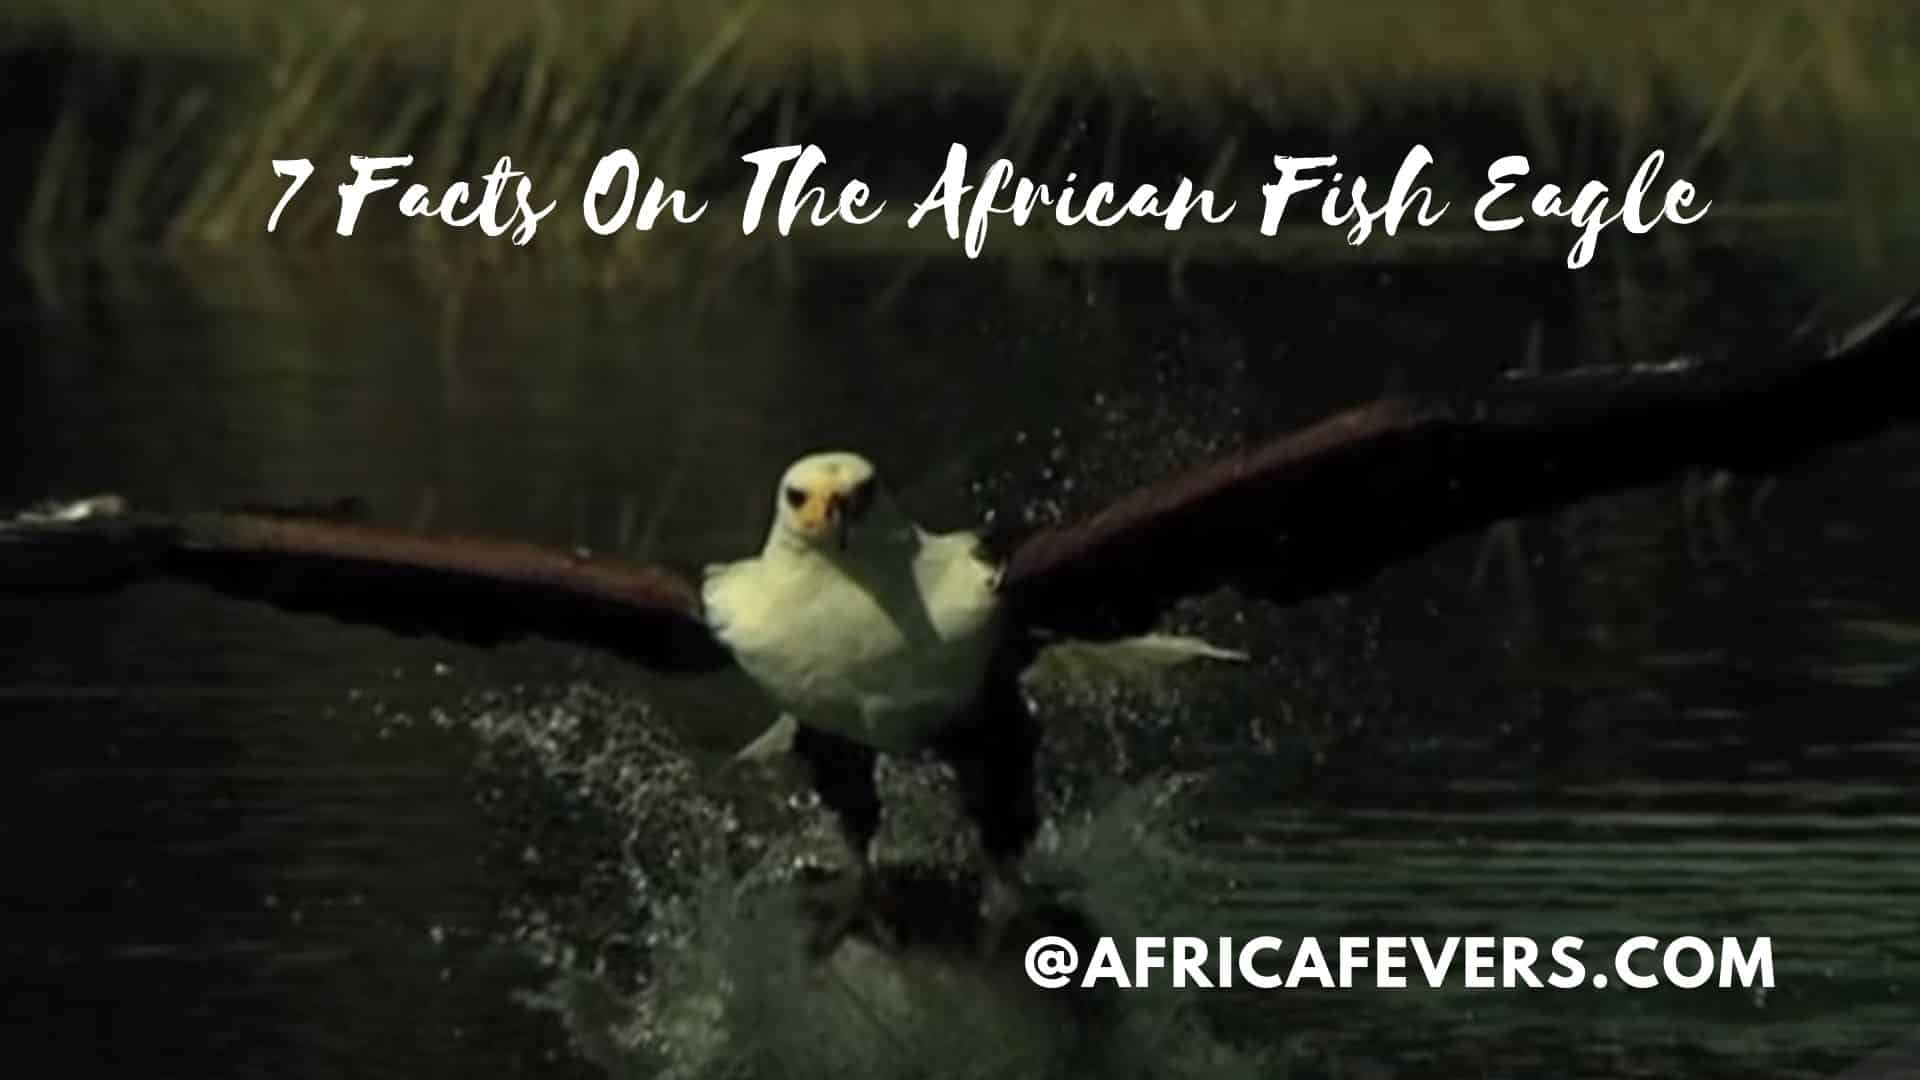 facts on the african fish eagle